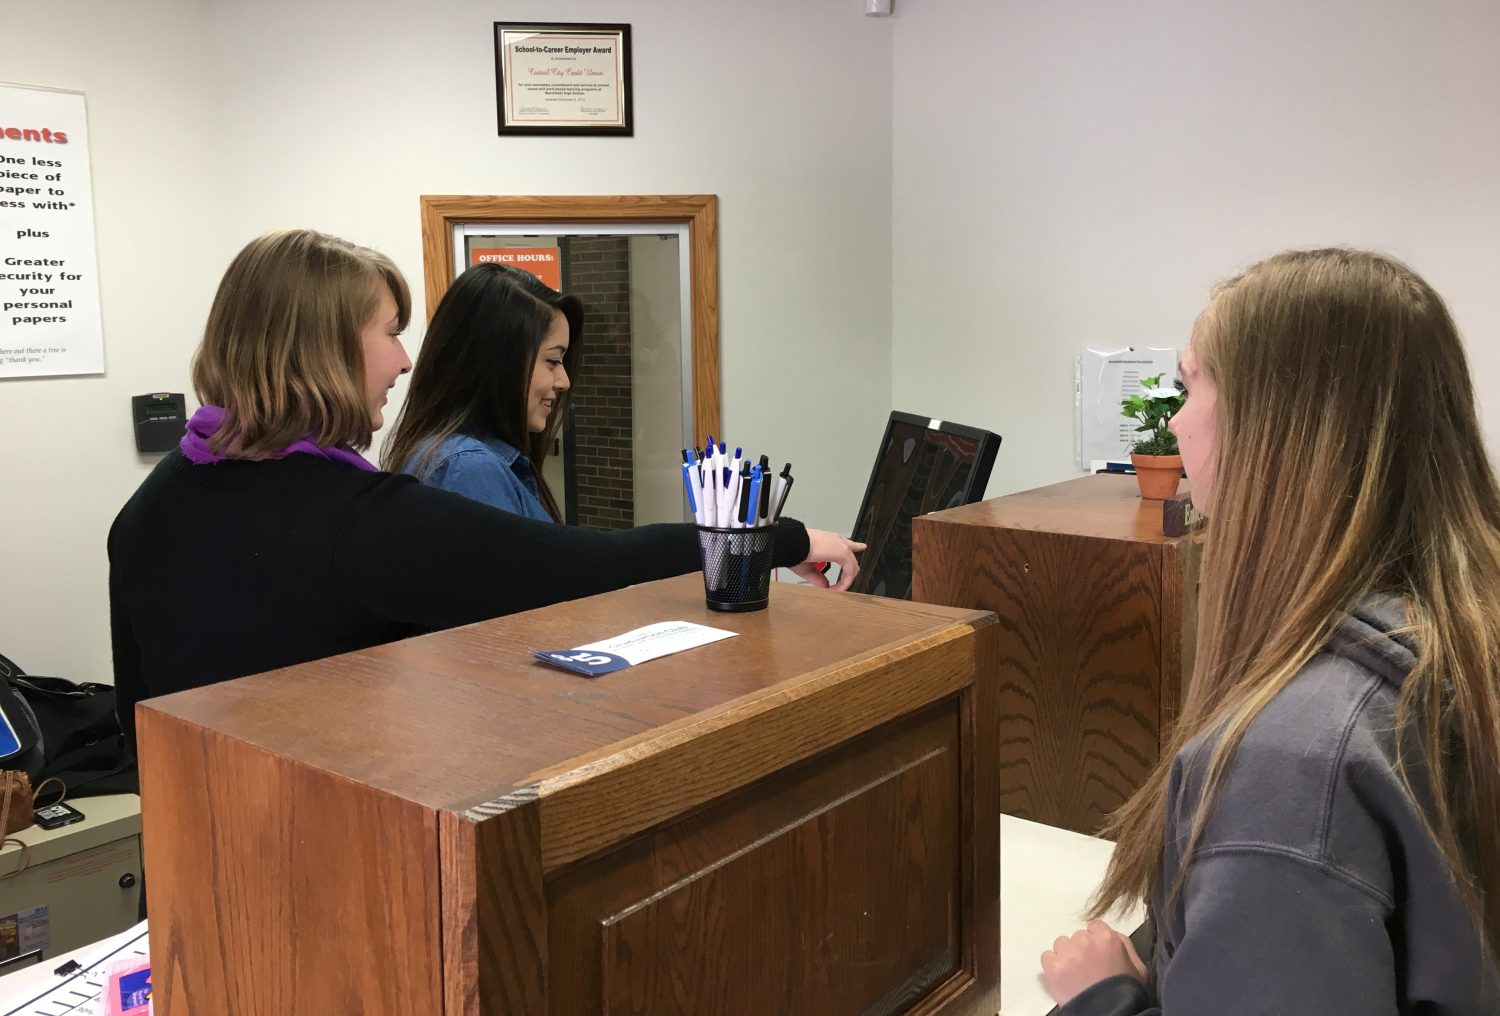 From right: Emily Cook, a senior at Marshfield High School, completes a transaction at Simplicity Credit Union's high school branch with Magaly Moreno and Ashley Landwehr.